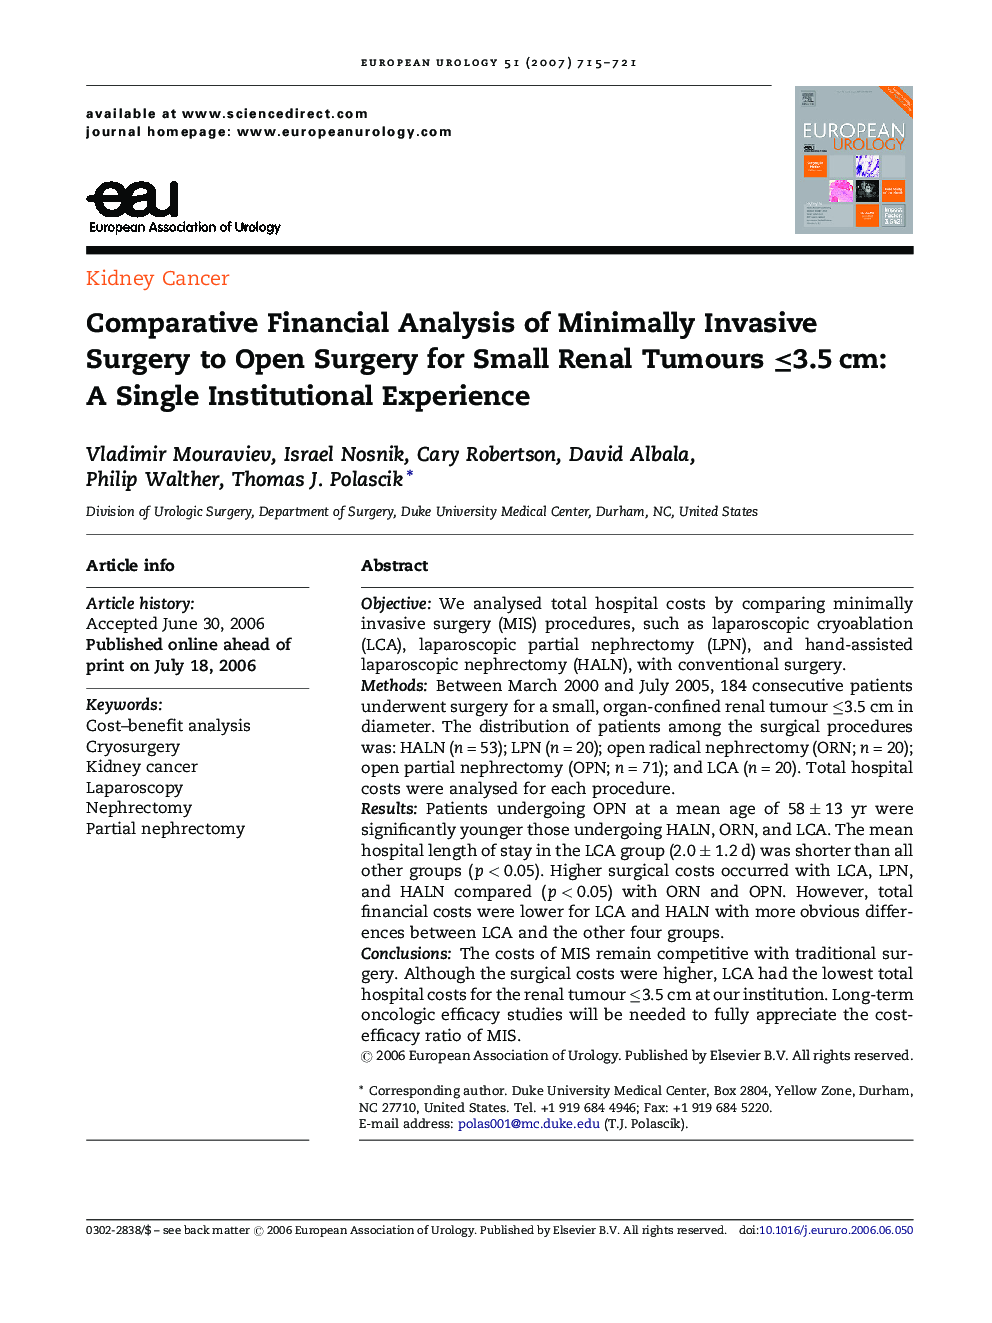 Comparative Financial Analysis of Minimally Invasive Surgery to Open Surgery for Small Renal Tumours ≤3.5 cm: A Single Institutional Experience